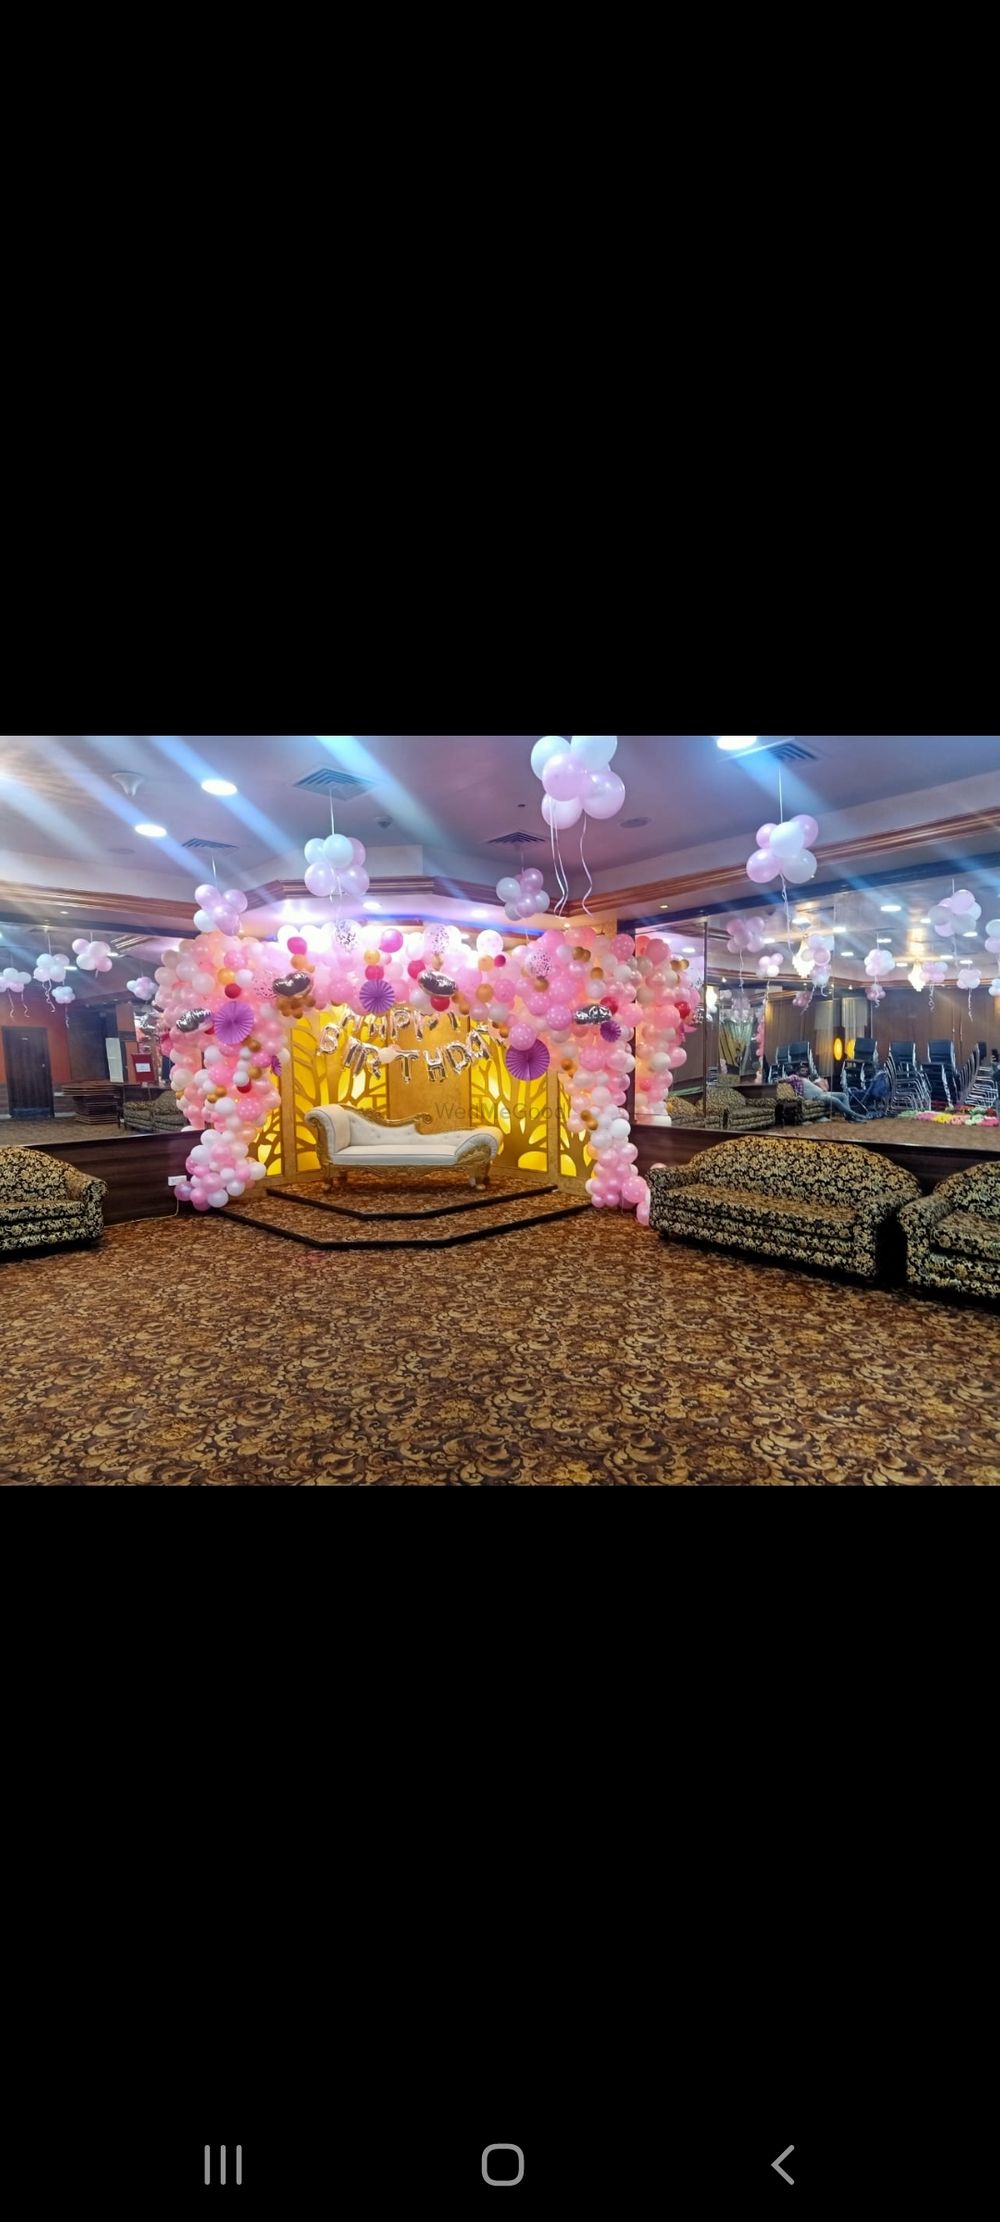 Photo From banquets - By Kamal Mundhra